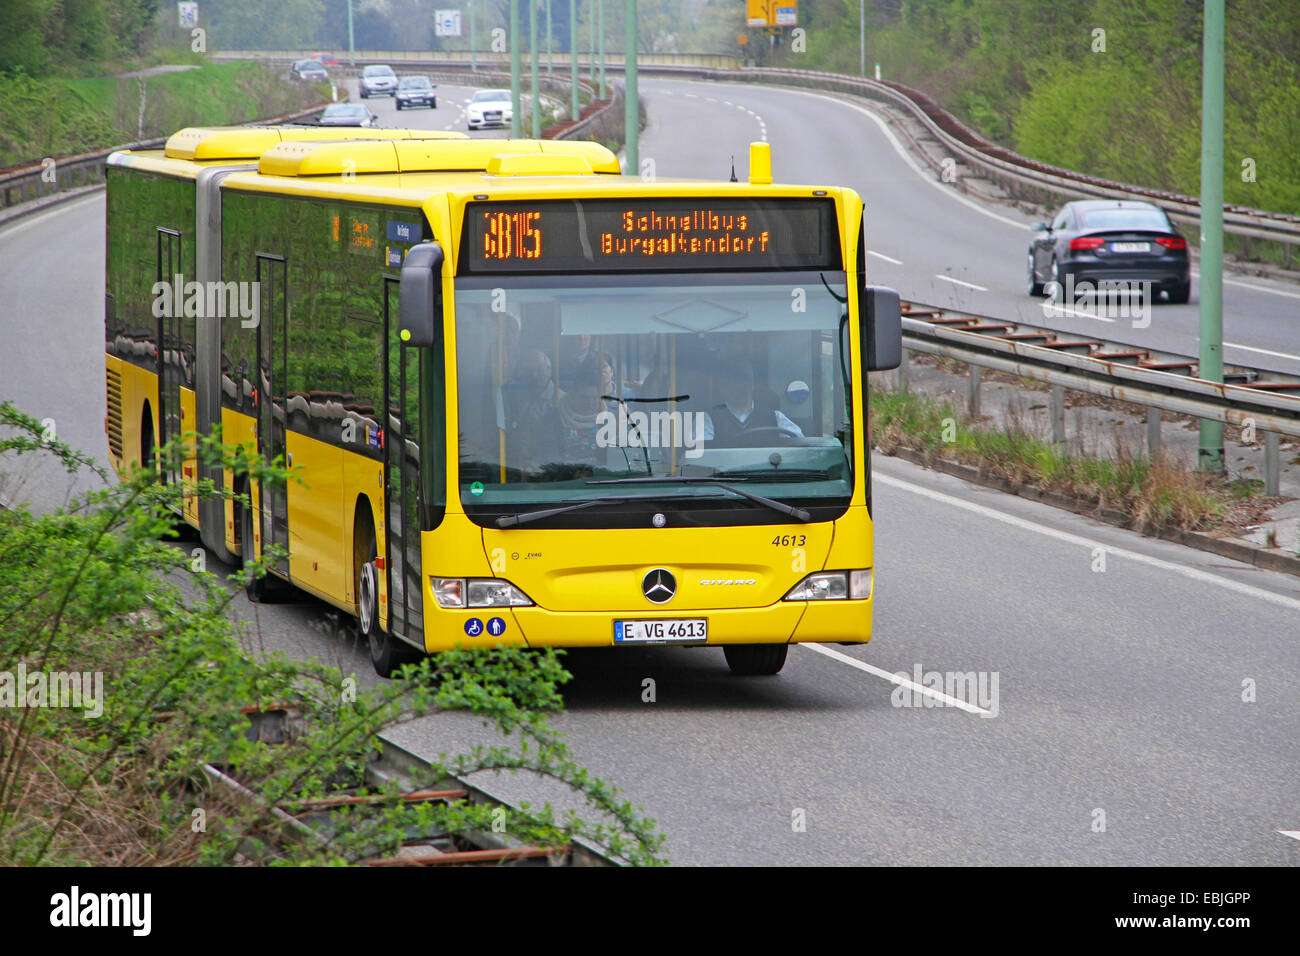 public service vehicle on the speedway connecting the city centre with the suburbs, Germany, North Rhine-Westphalia, Ruhr Area, Essen Stock Photo